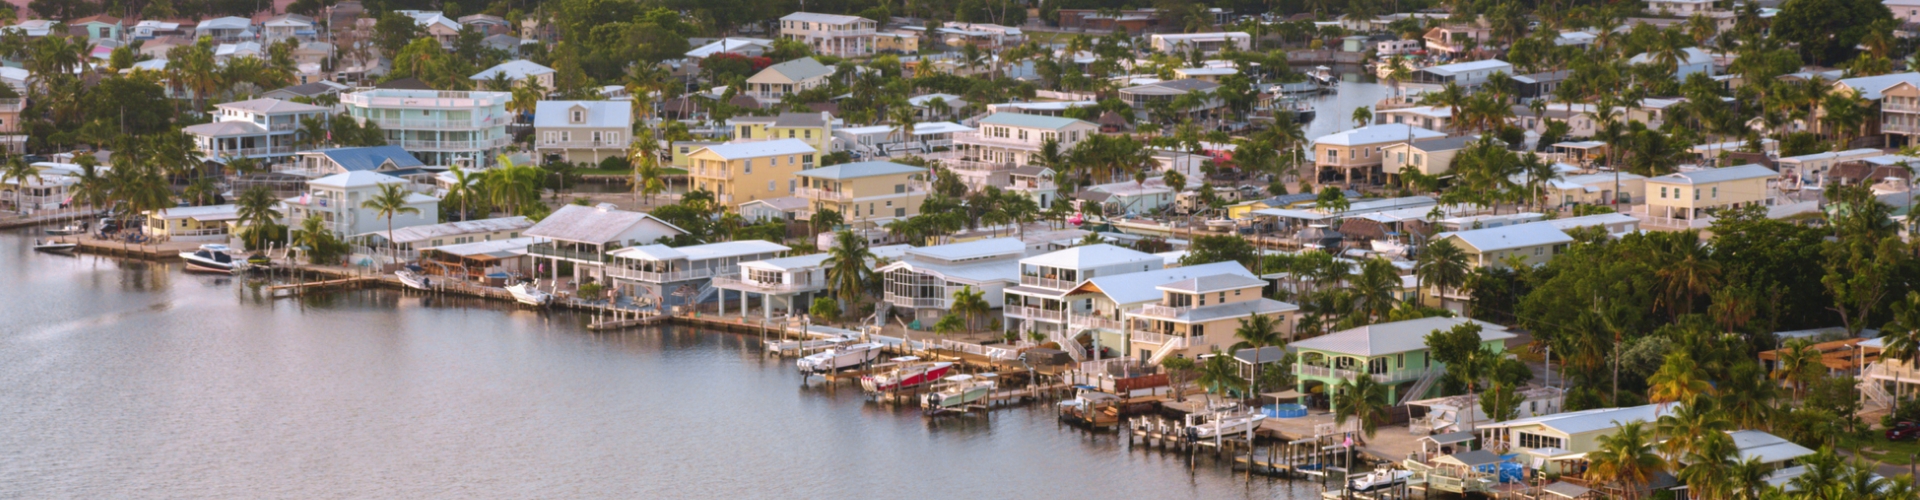 a row of houses sit on the shore of a body of water in Florida